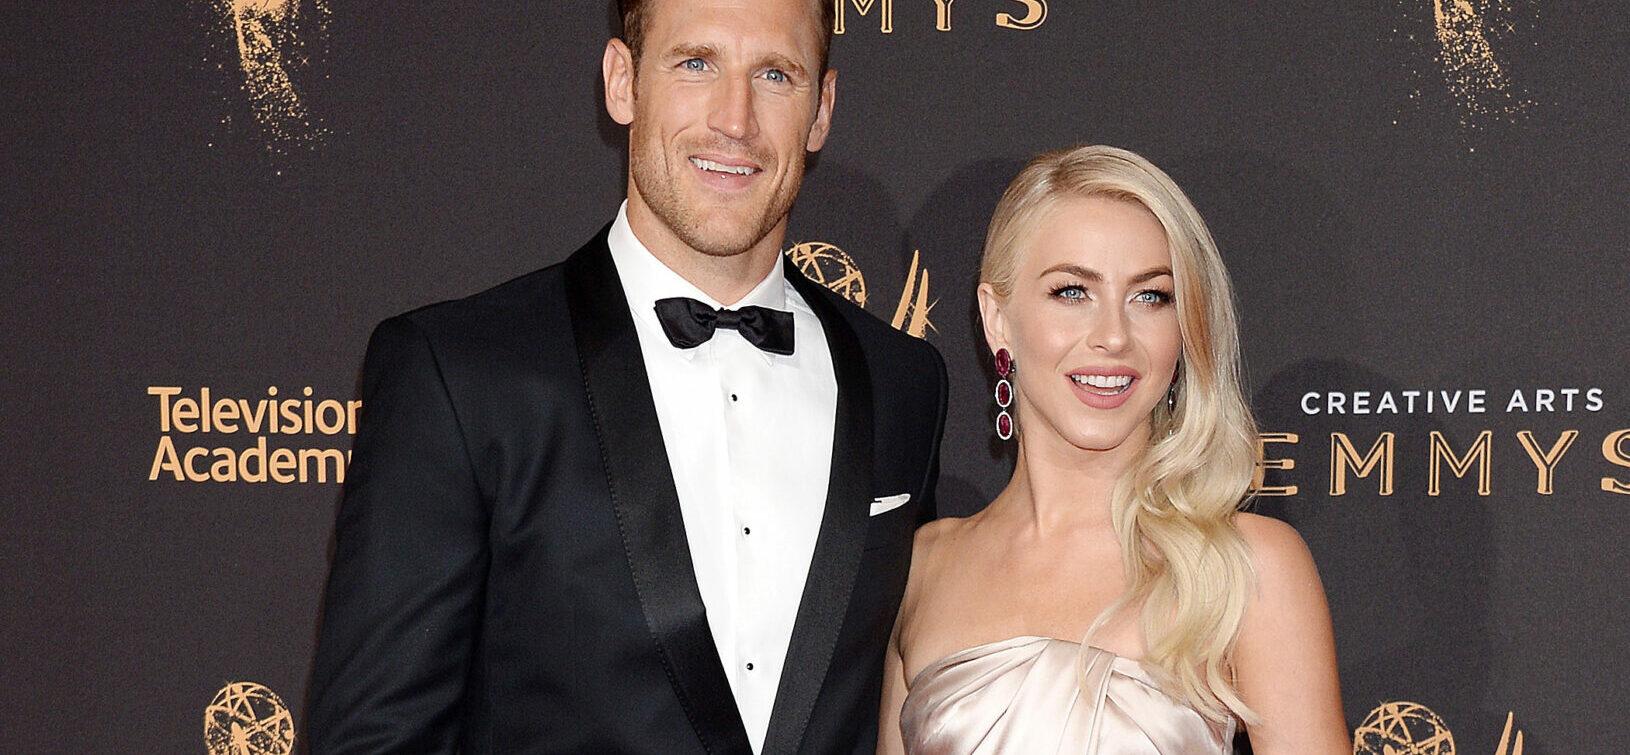 Julianne Hough Is Officially Single, Divorce With Brooks Laich Is Finalized